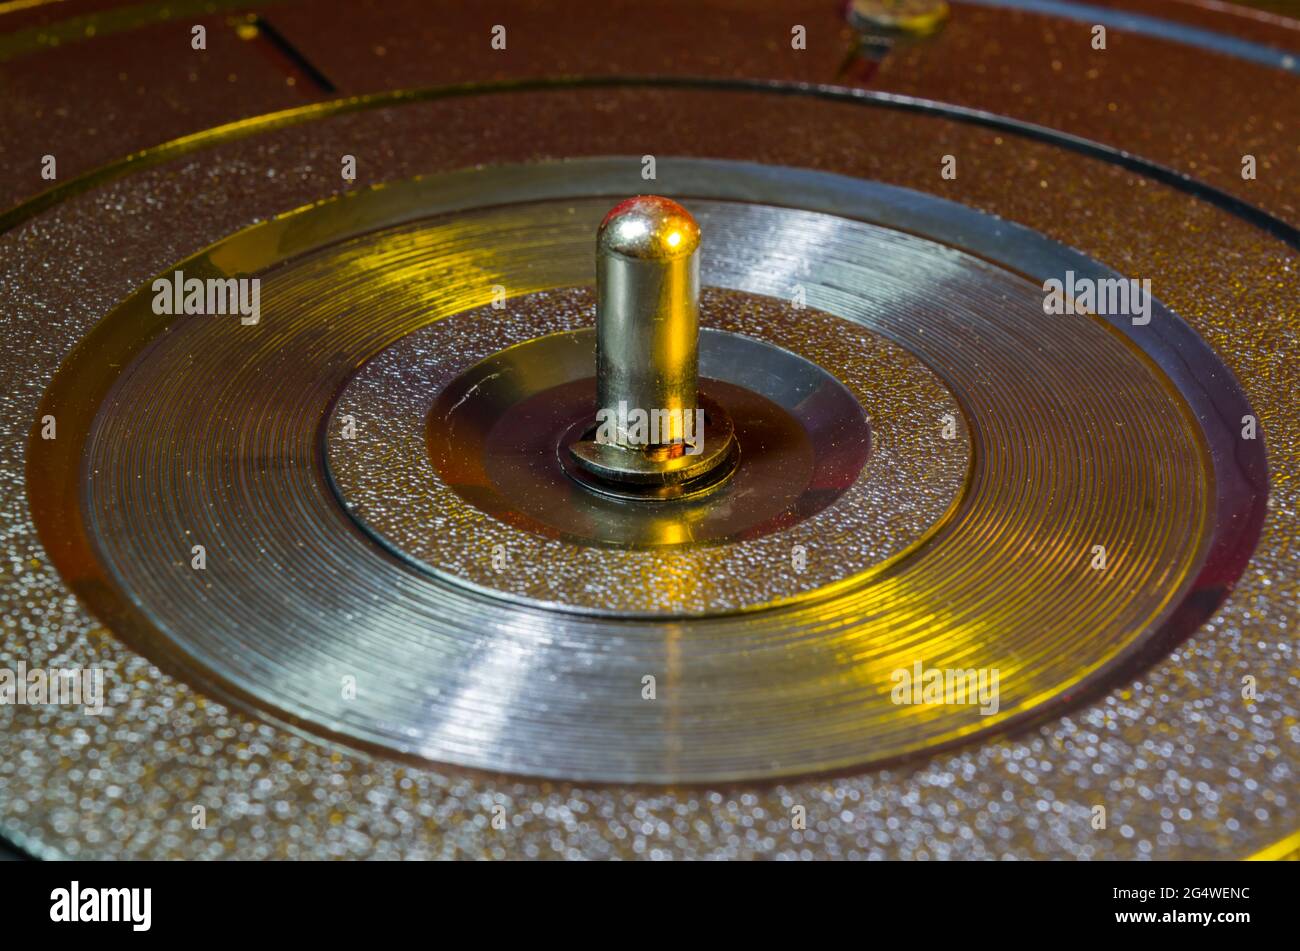 A Close-Up Studio Photograph of a the Turntable of a Home Record Player Stock Photo